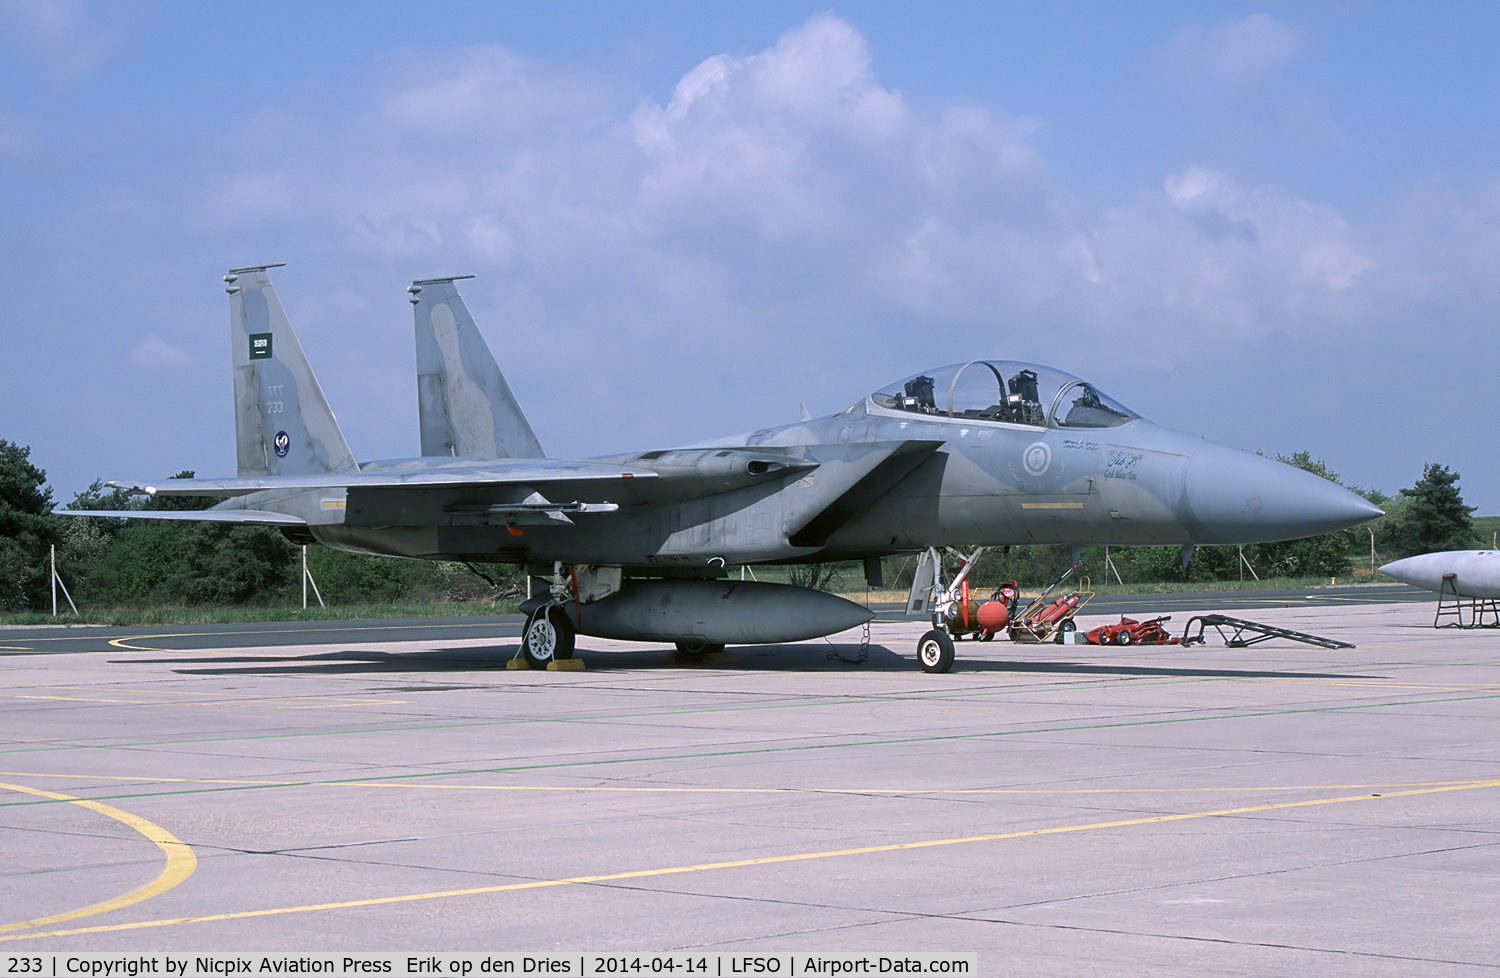 233, 1979 McDonnell Douglas F-15D Eagle C/N 0546/D015, 233 was one of the 6 F-15's of the Royal Saudi Arabia AF participating in the exercise Green Shield 20104.